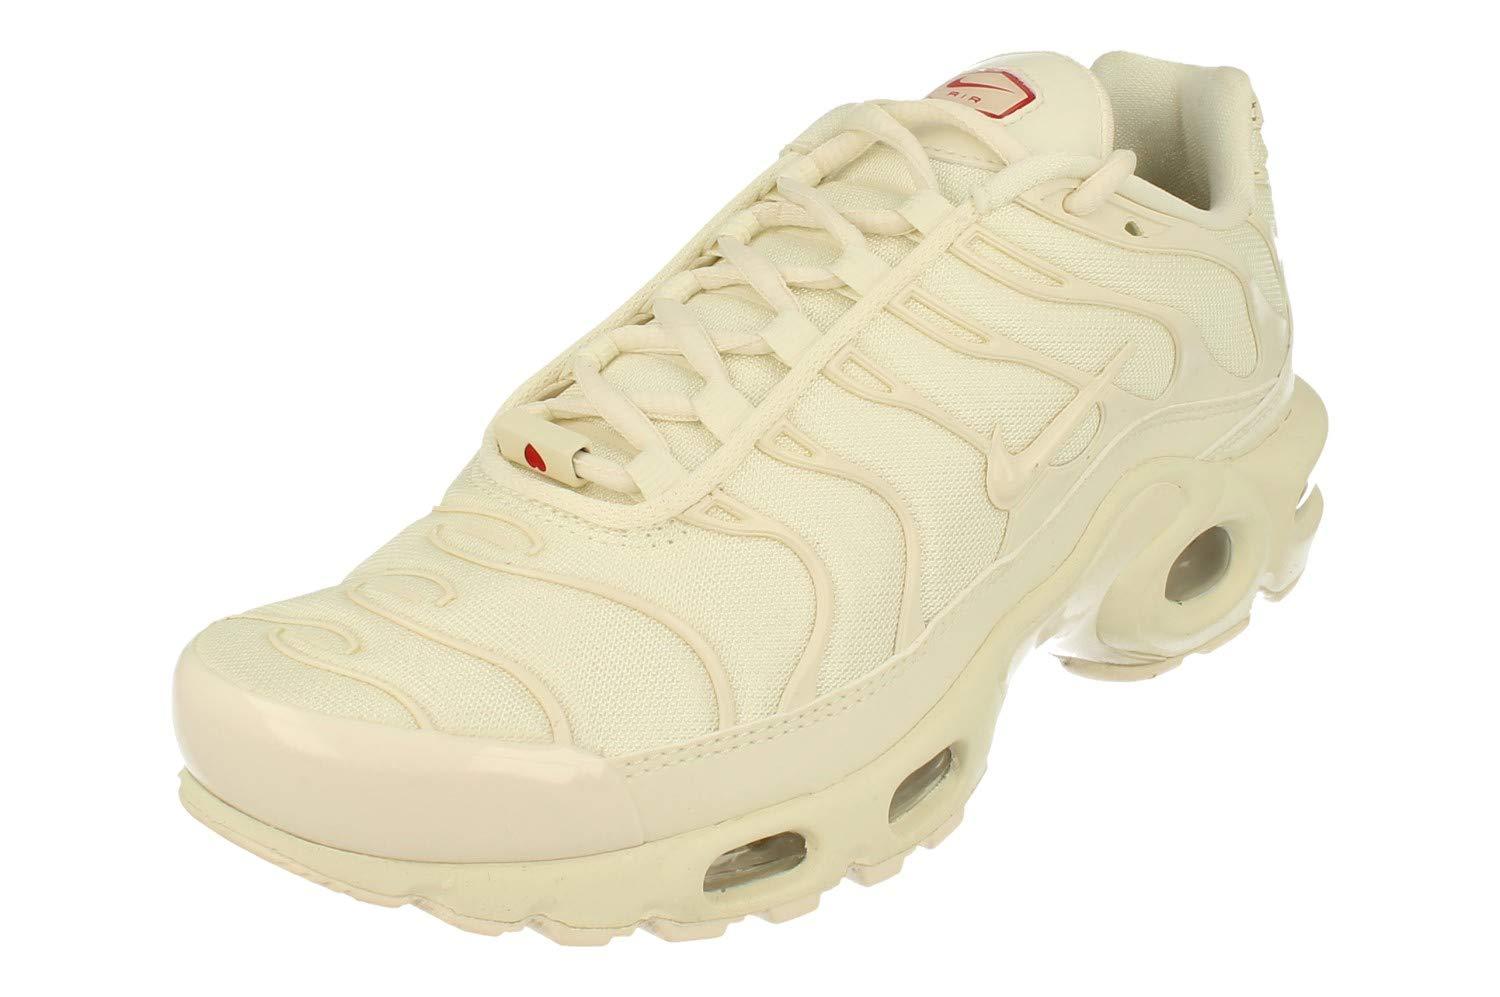 Nike Synthetic S Original Air Max Plus Tn Se Pale Ivory White Trainers  Cd0182 100 - Lyst